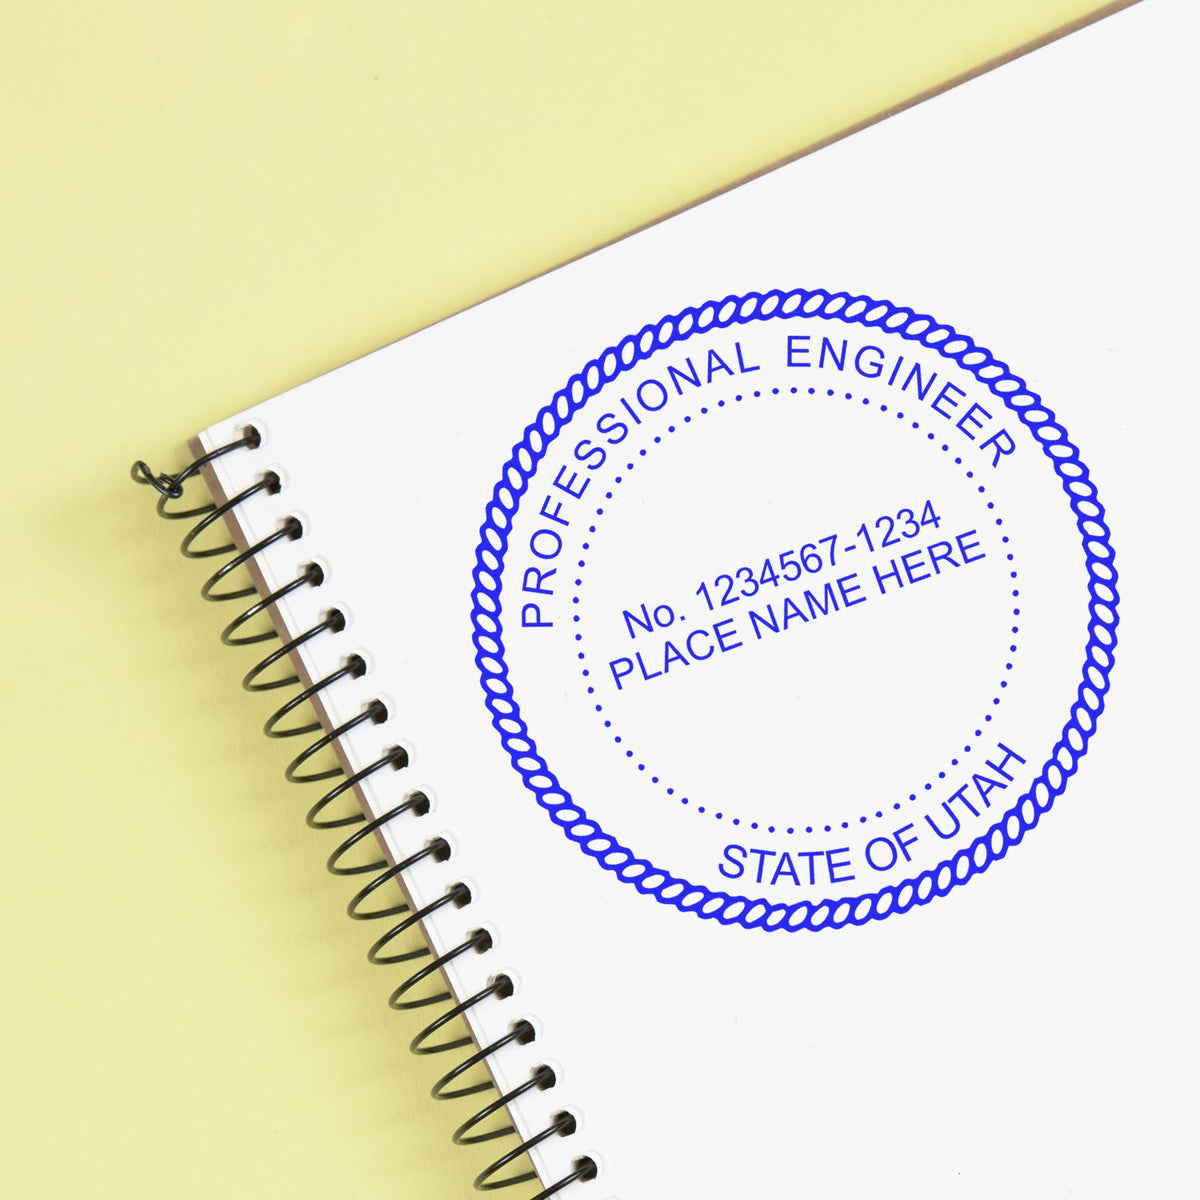 The Slim Pre-Inked Utah Professional Engineer Seal Stamp stamp impression comes to life with a crisp, detailed photo on paper - showcasing true professional quality.